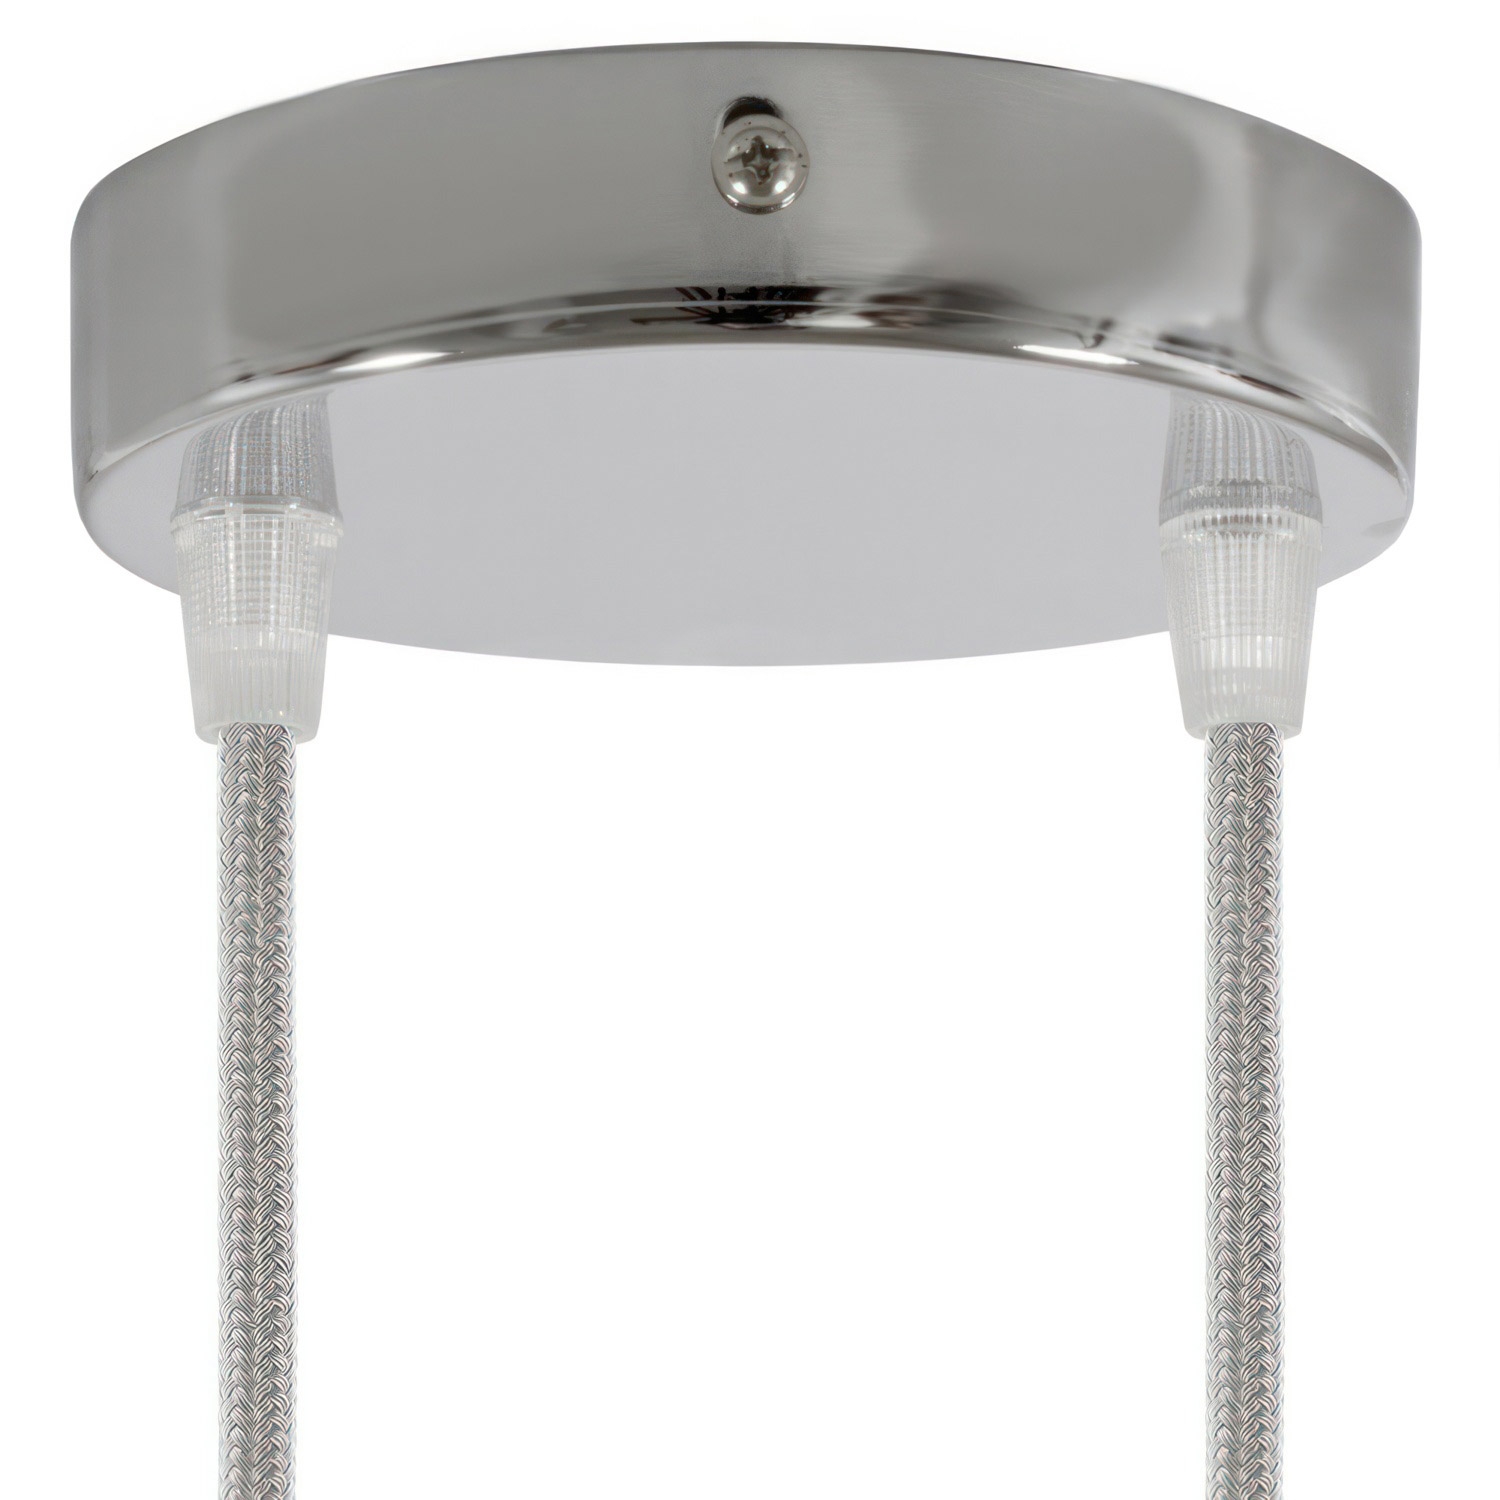 Classic 2-hole Round Metal Ceiling Canopy Kit